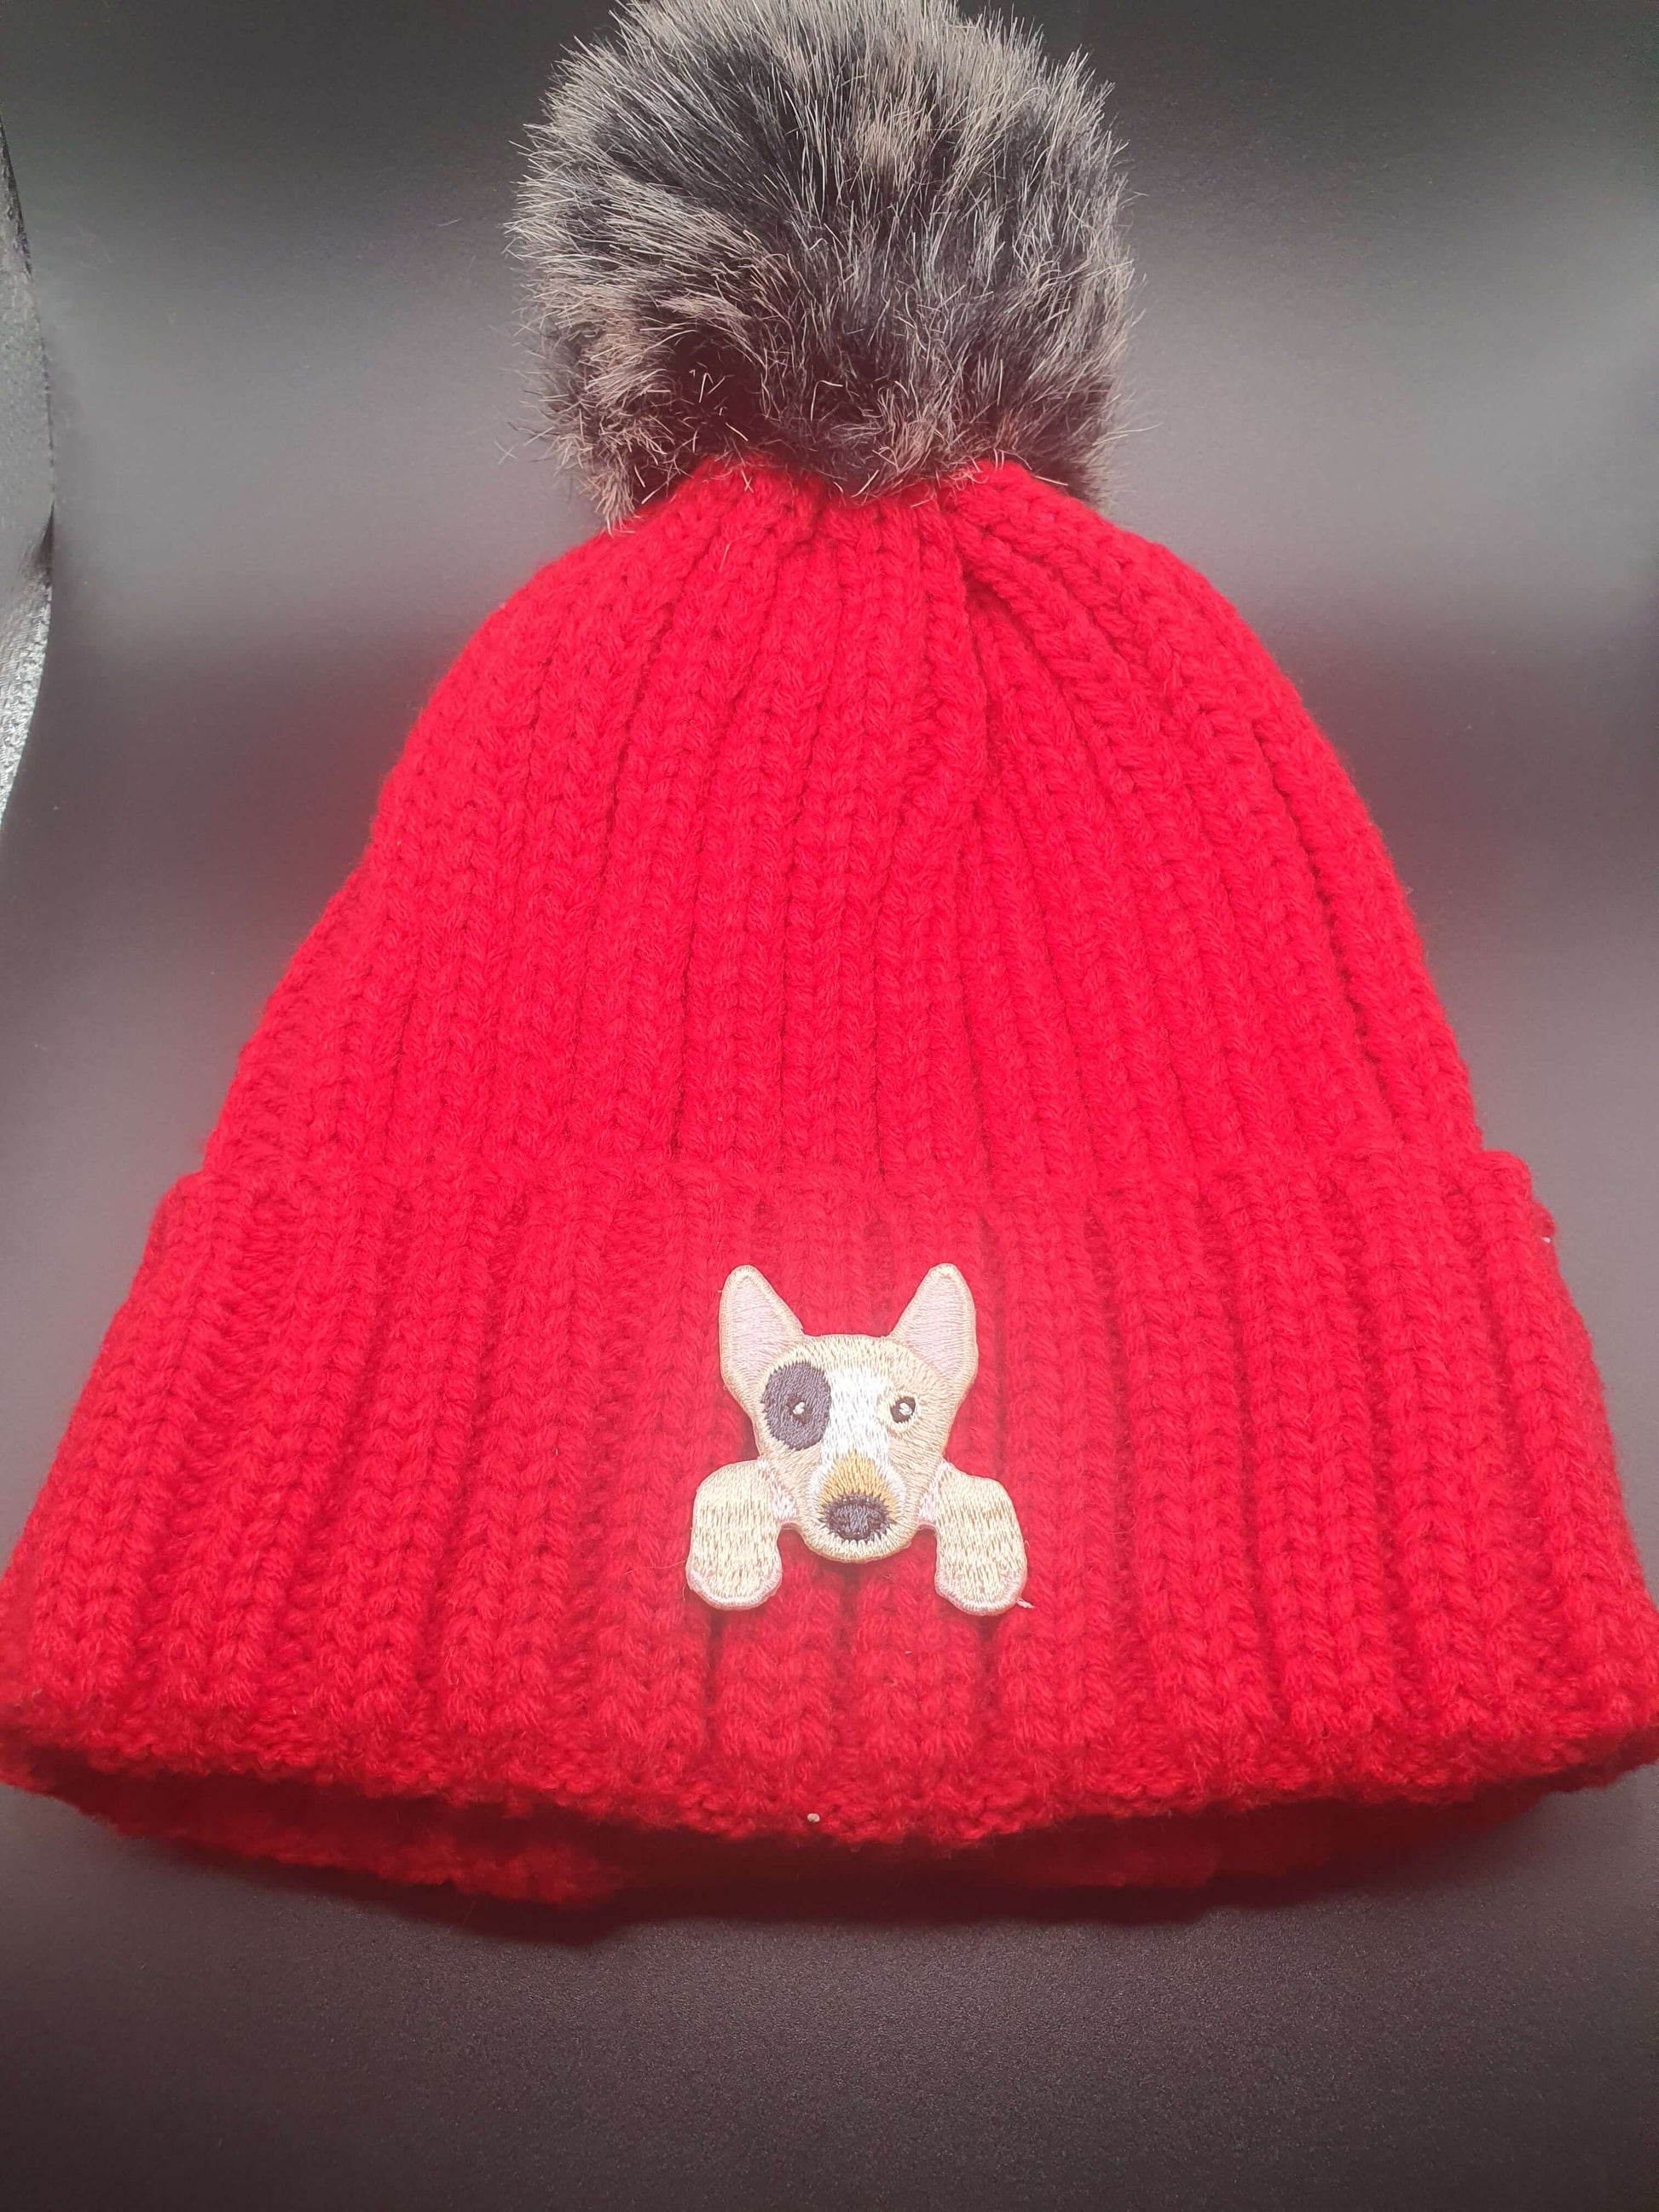 Dog Themed Knitted Beanies - Style's Bug Bull Terrier / Red